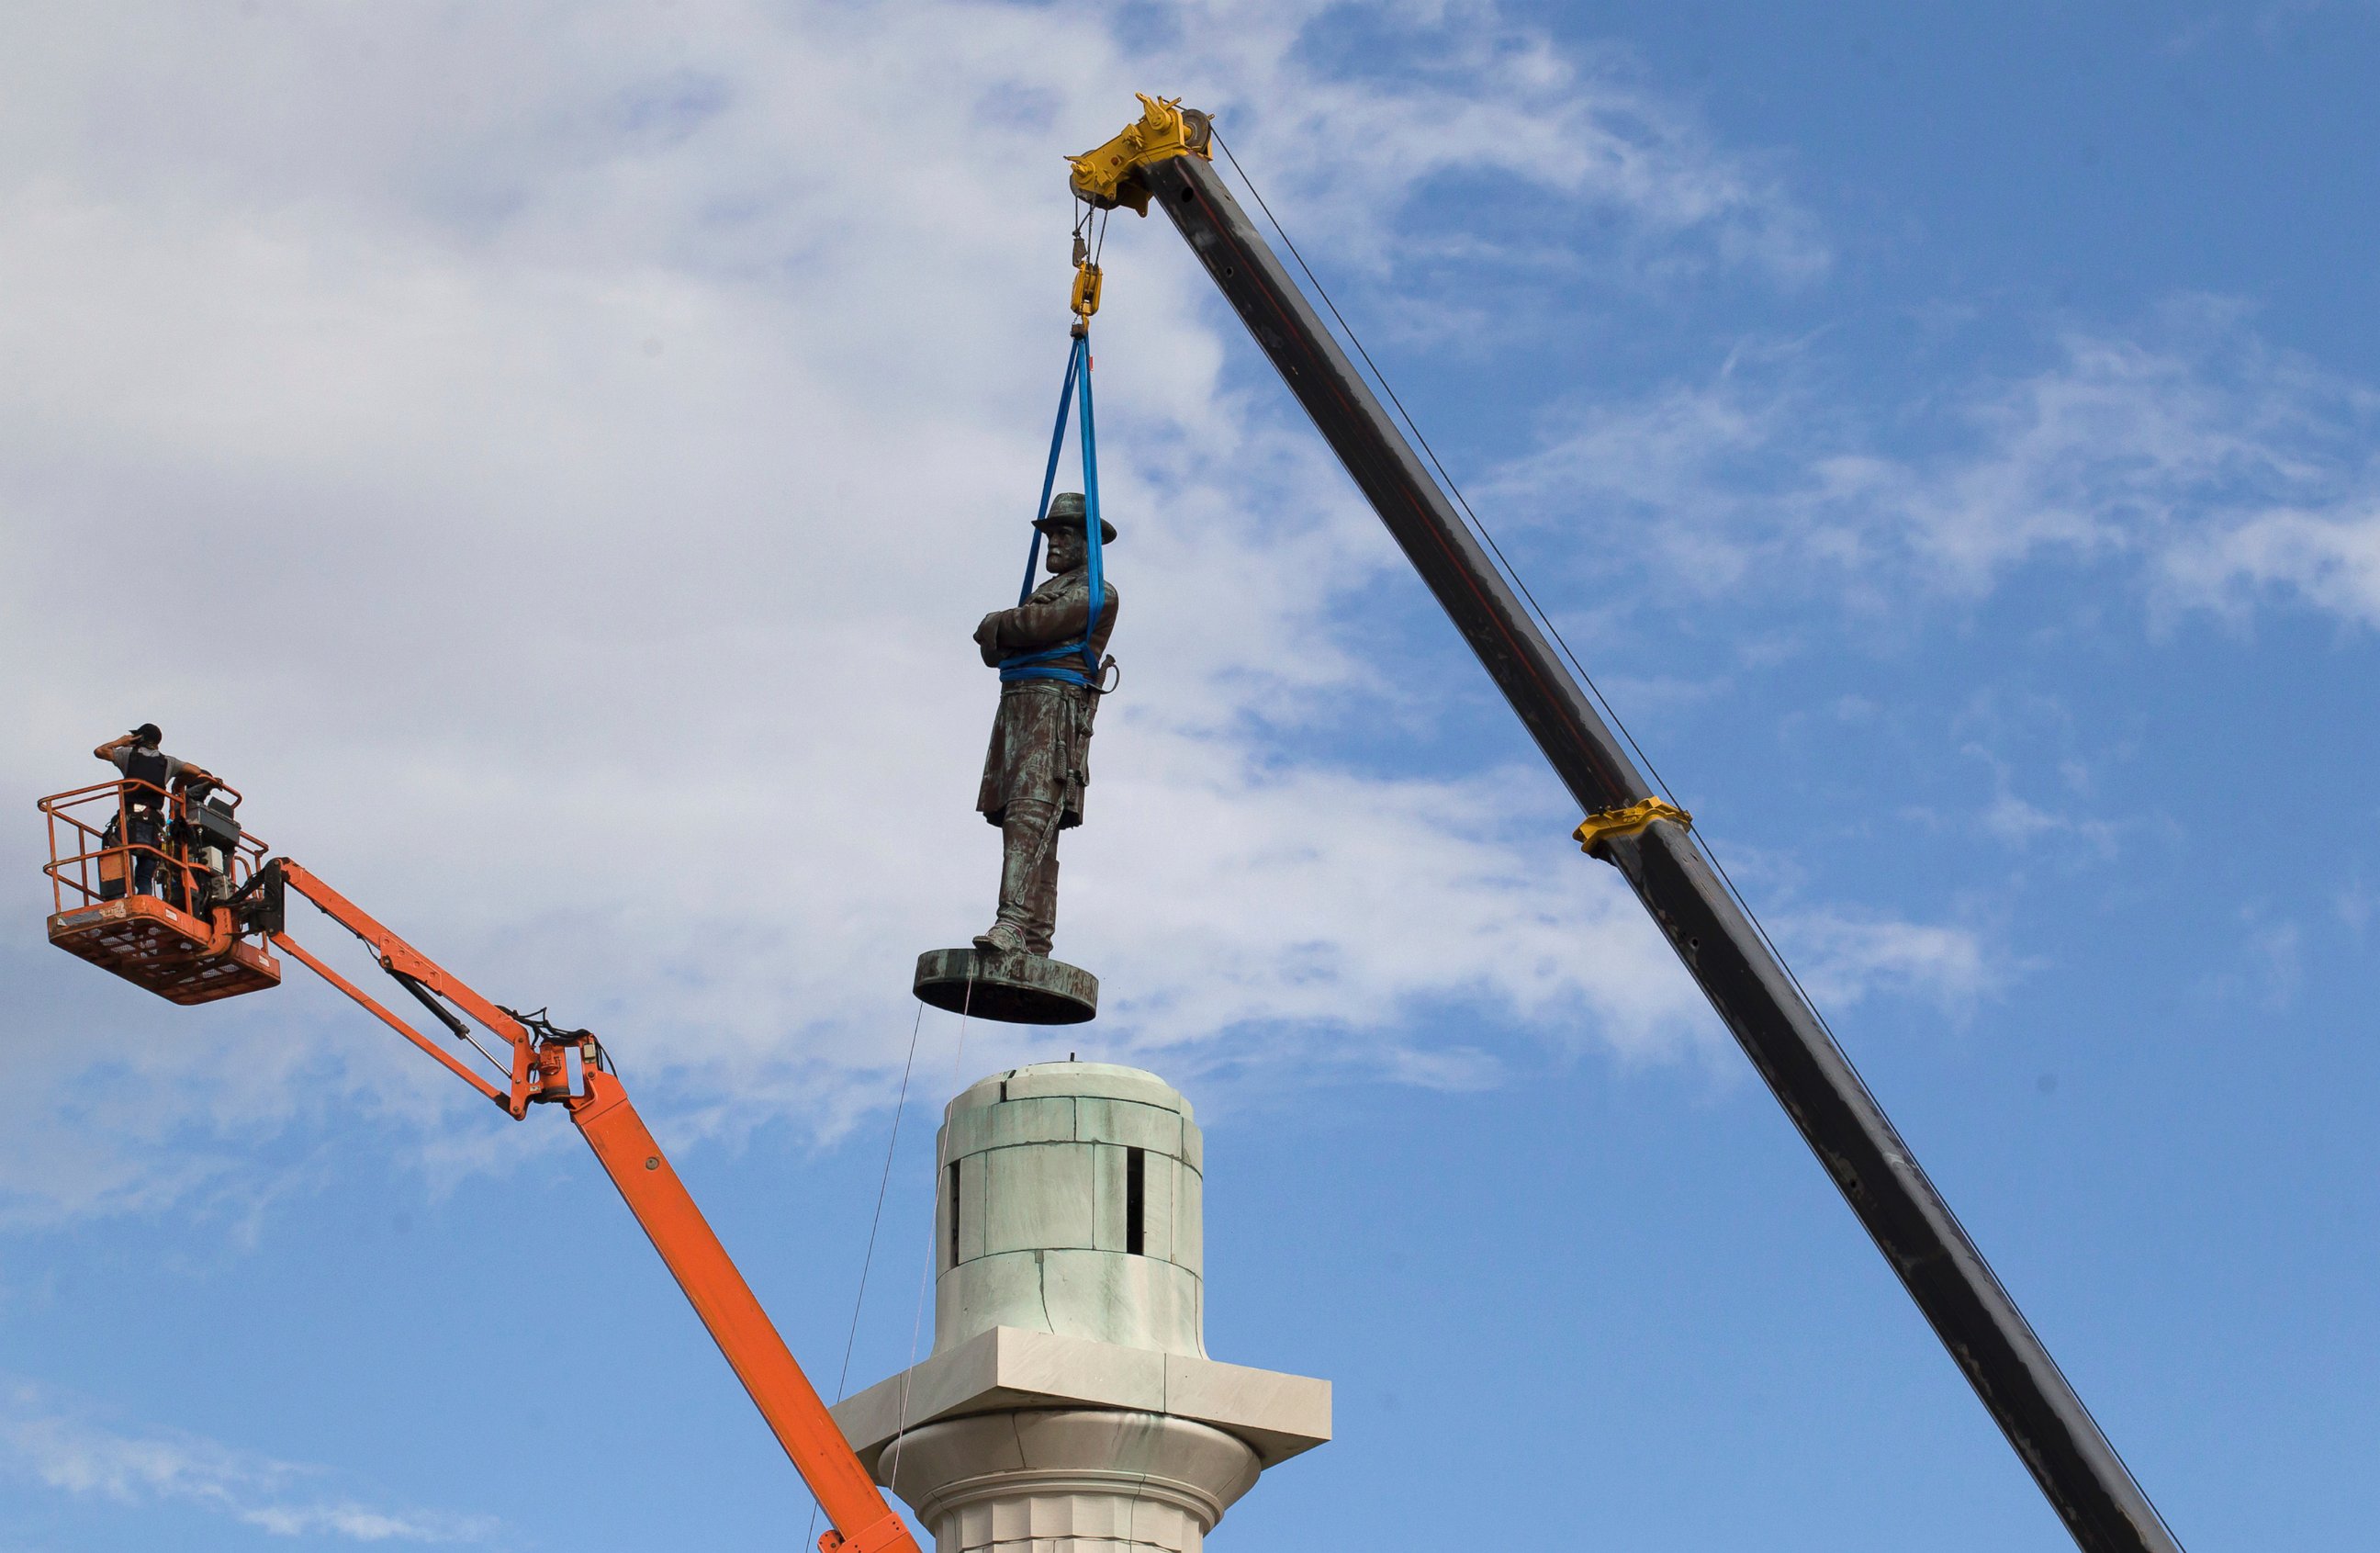 PHOTO: A statue of Confederate General Robert E. Lee is removed from Lee Circle, May 19, 2017, in New Orleans.